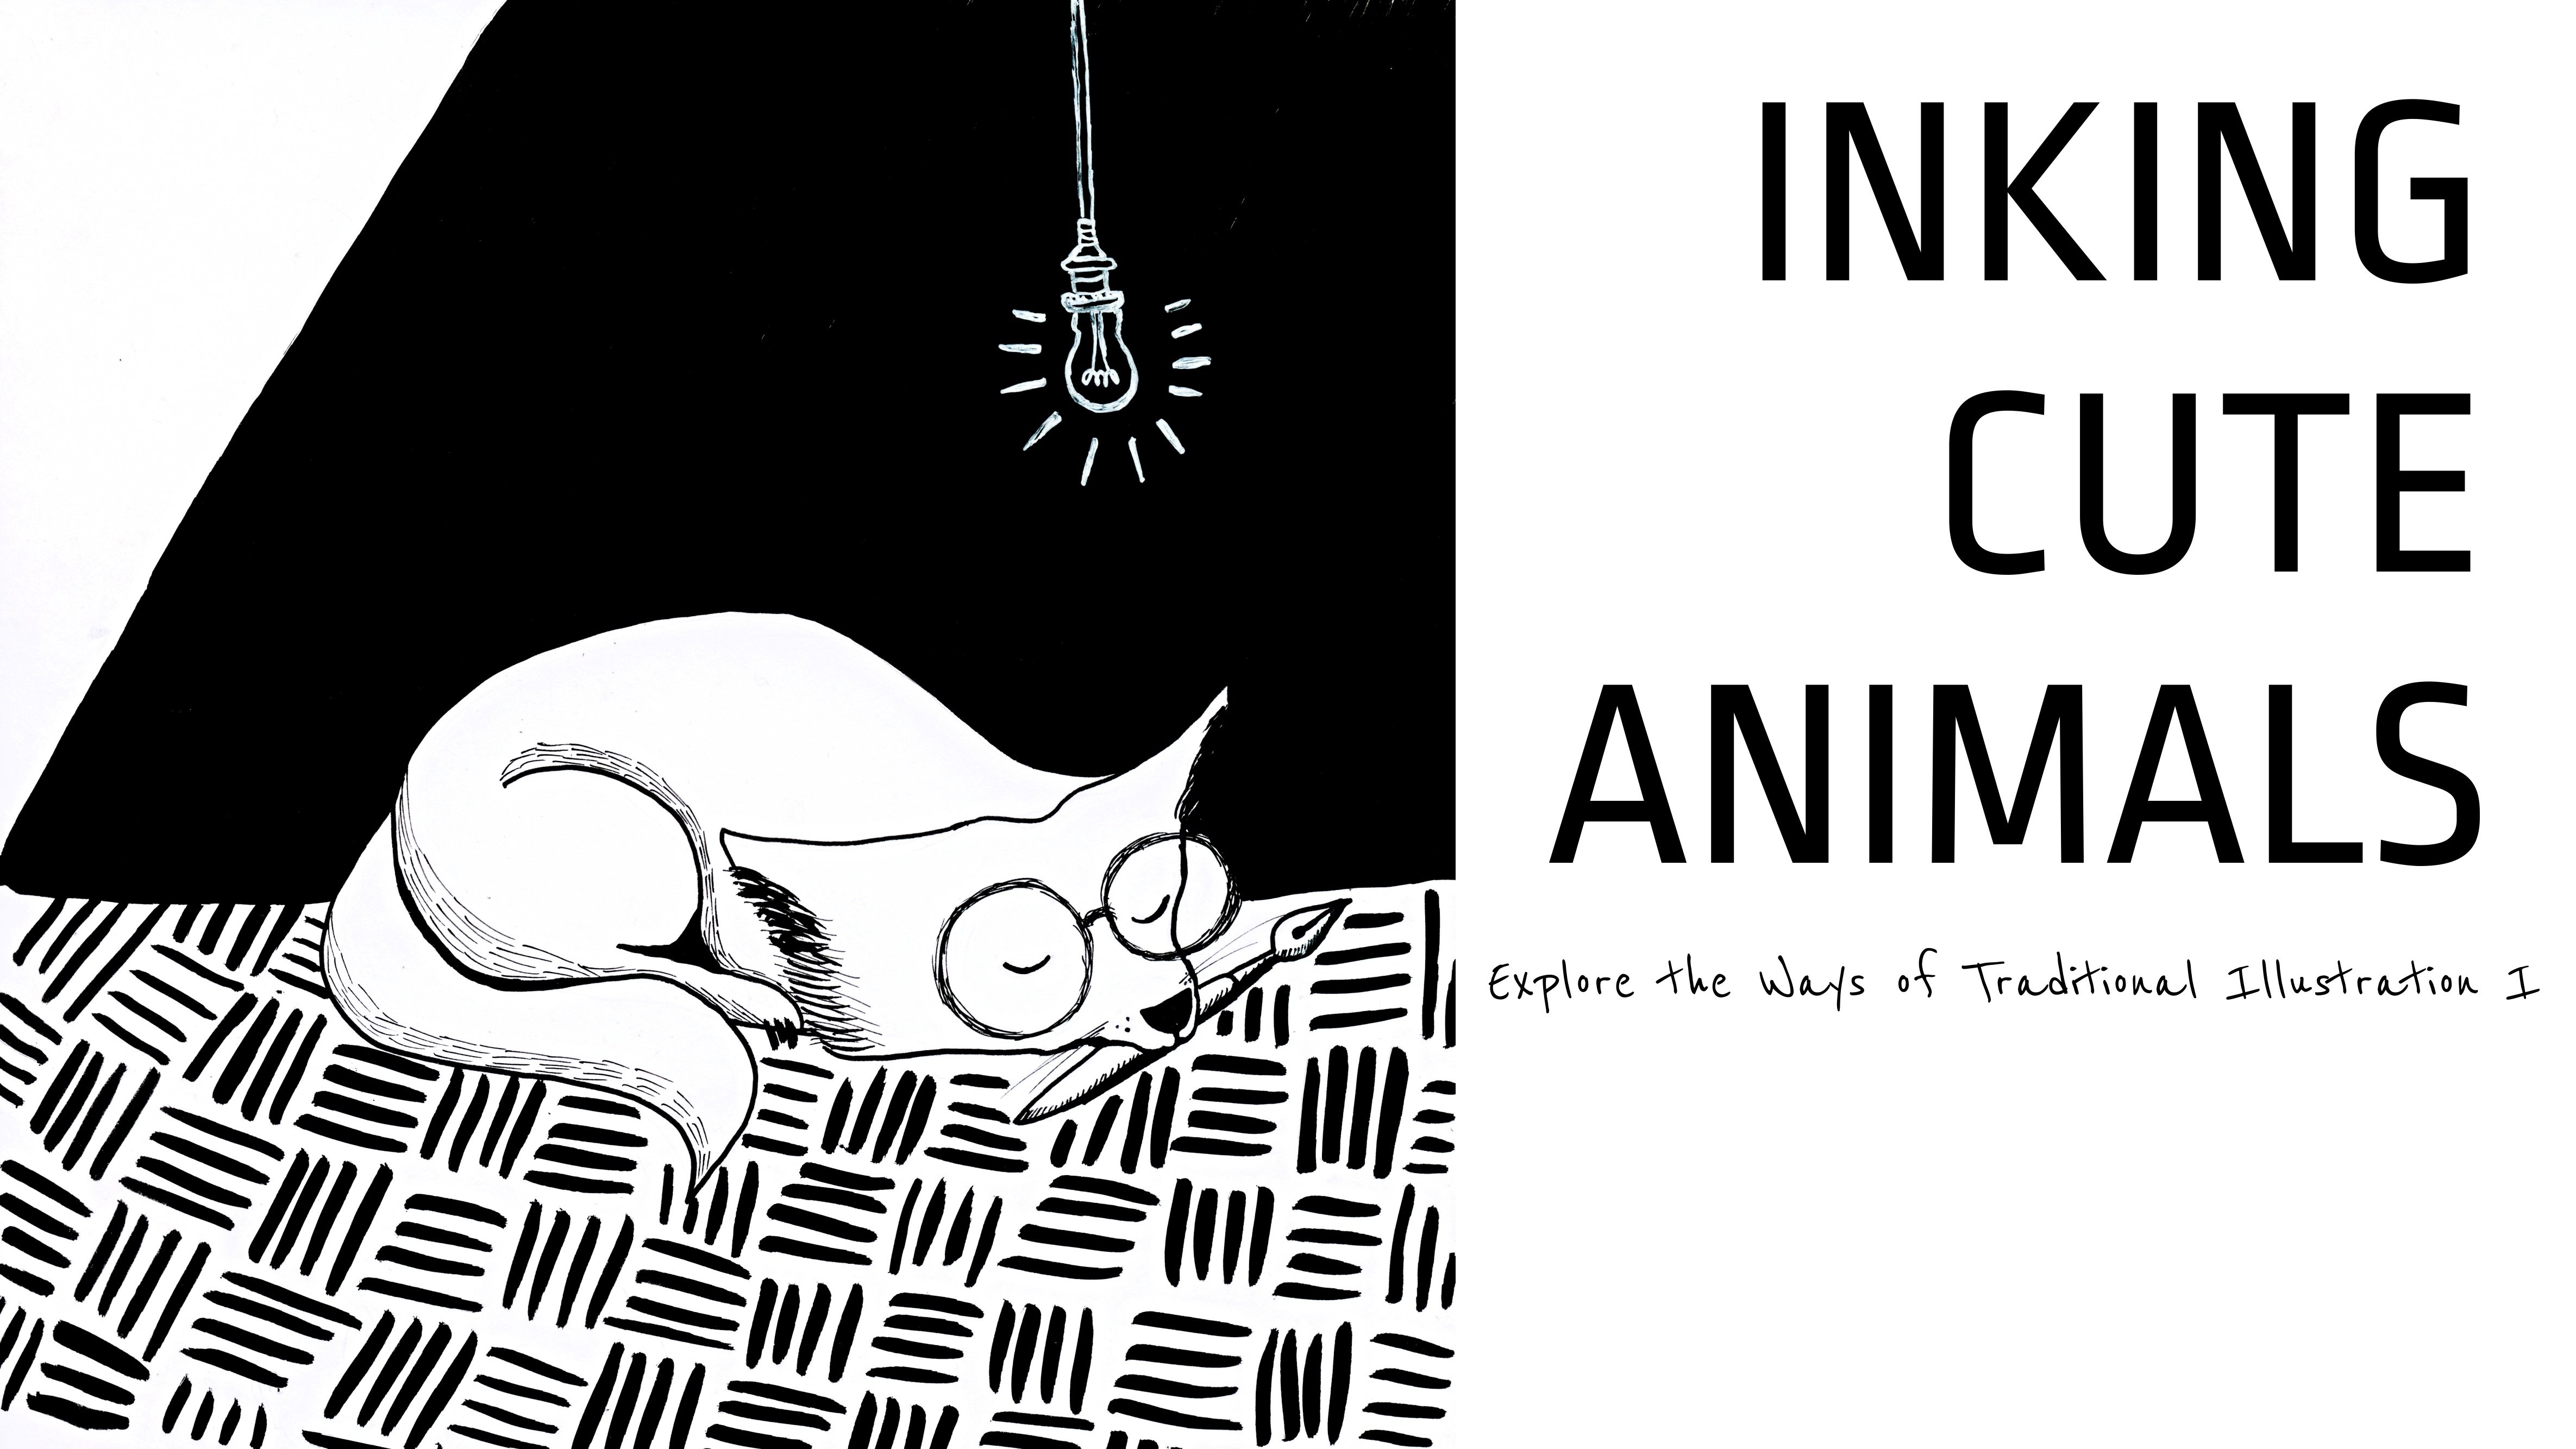 INKING CUTE ANIMALS: Explore the Ways of Traditional Illustration I